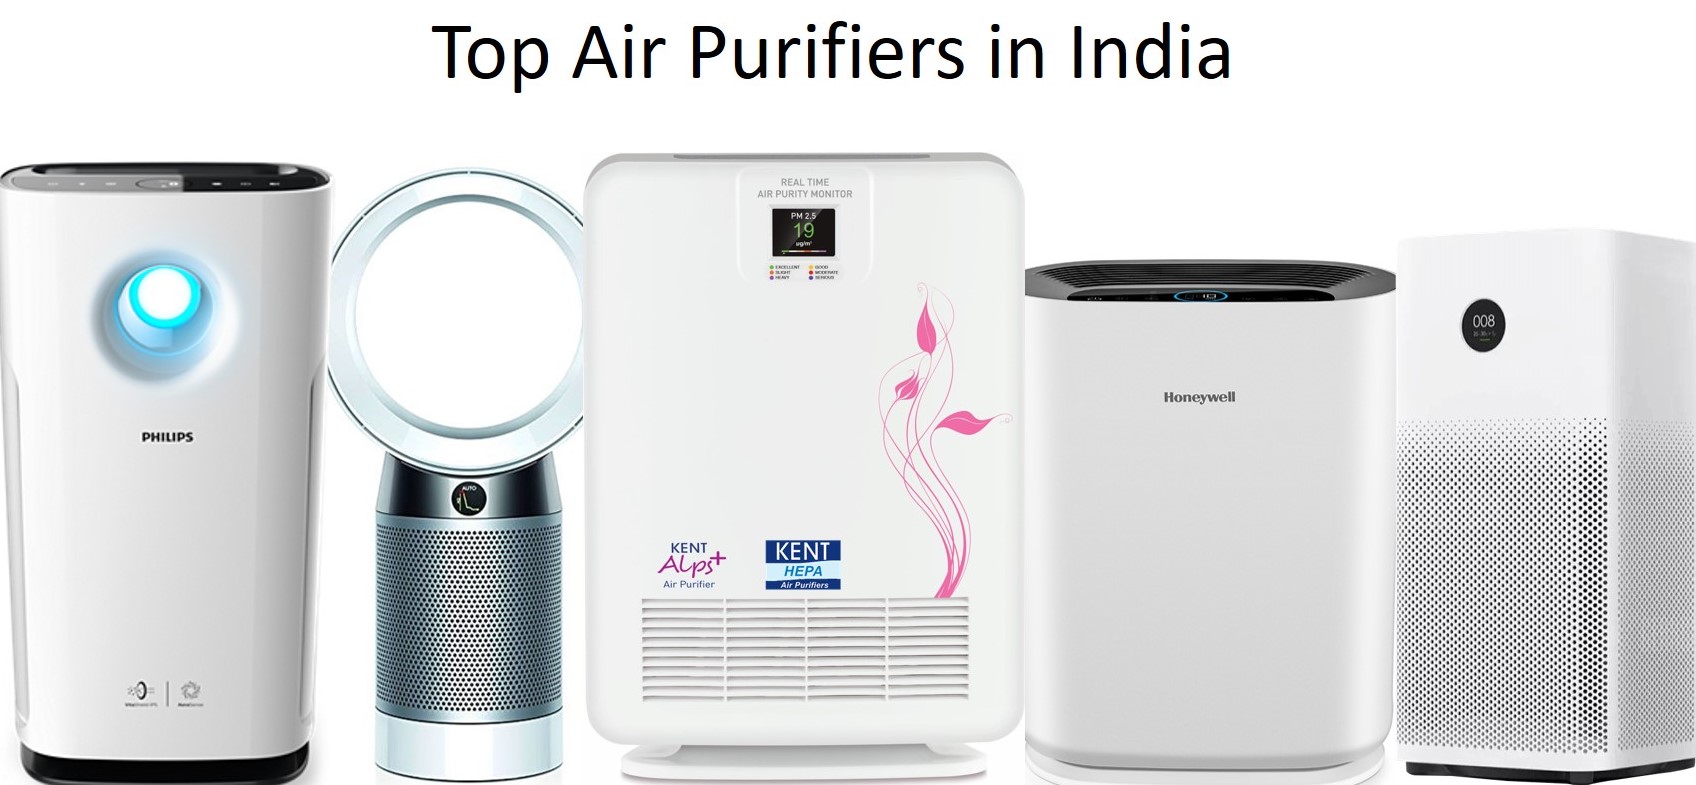 Top 10 Best Air Purifiers in India (2019) for home Reviews